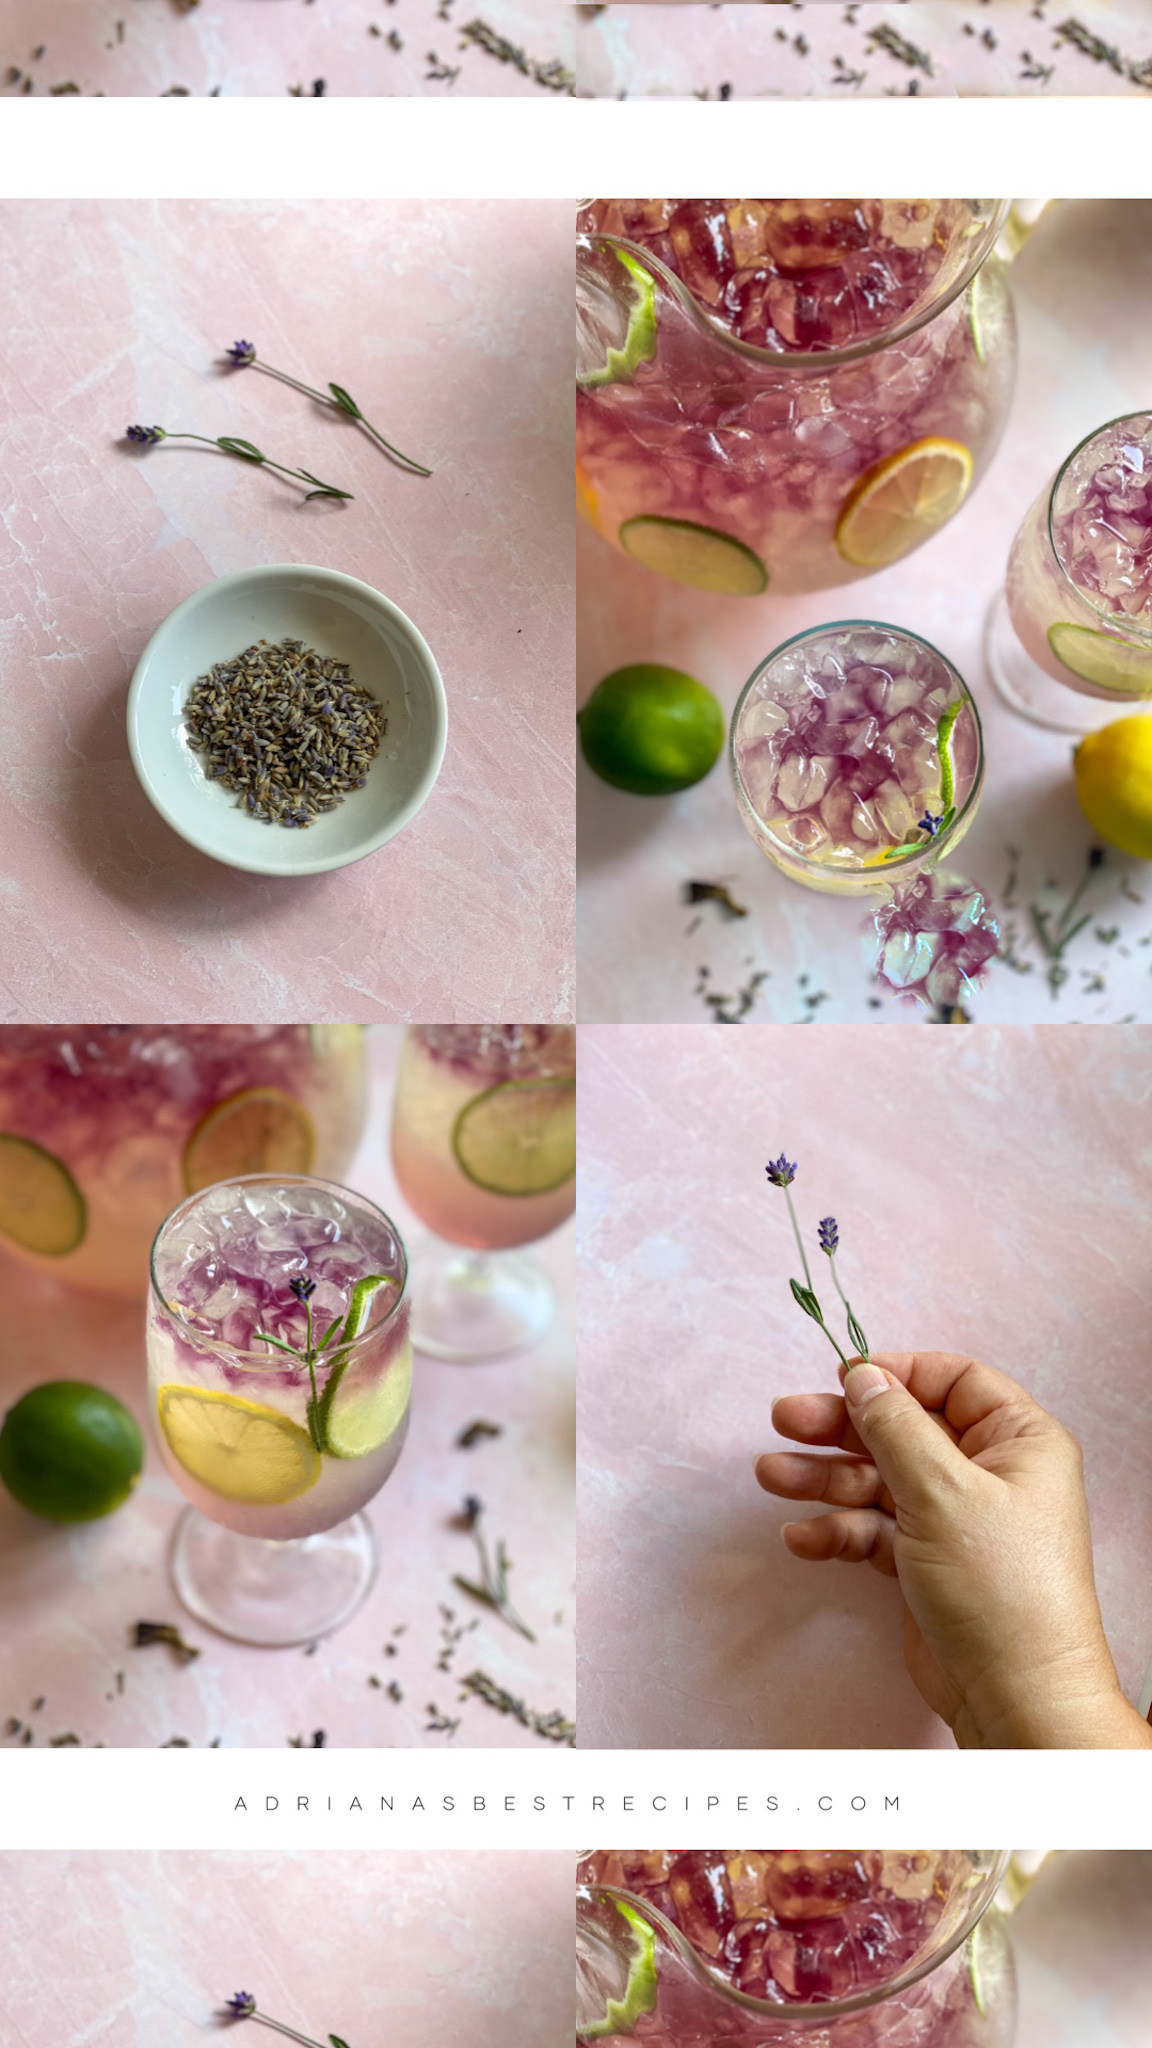 A collage showing the lemonade and the fresh and dried culinary grade lavender